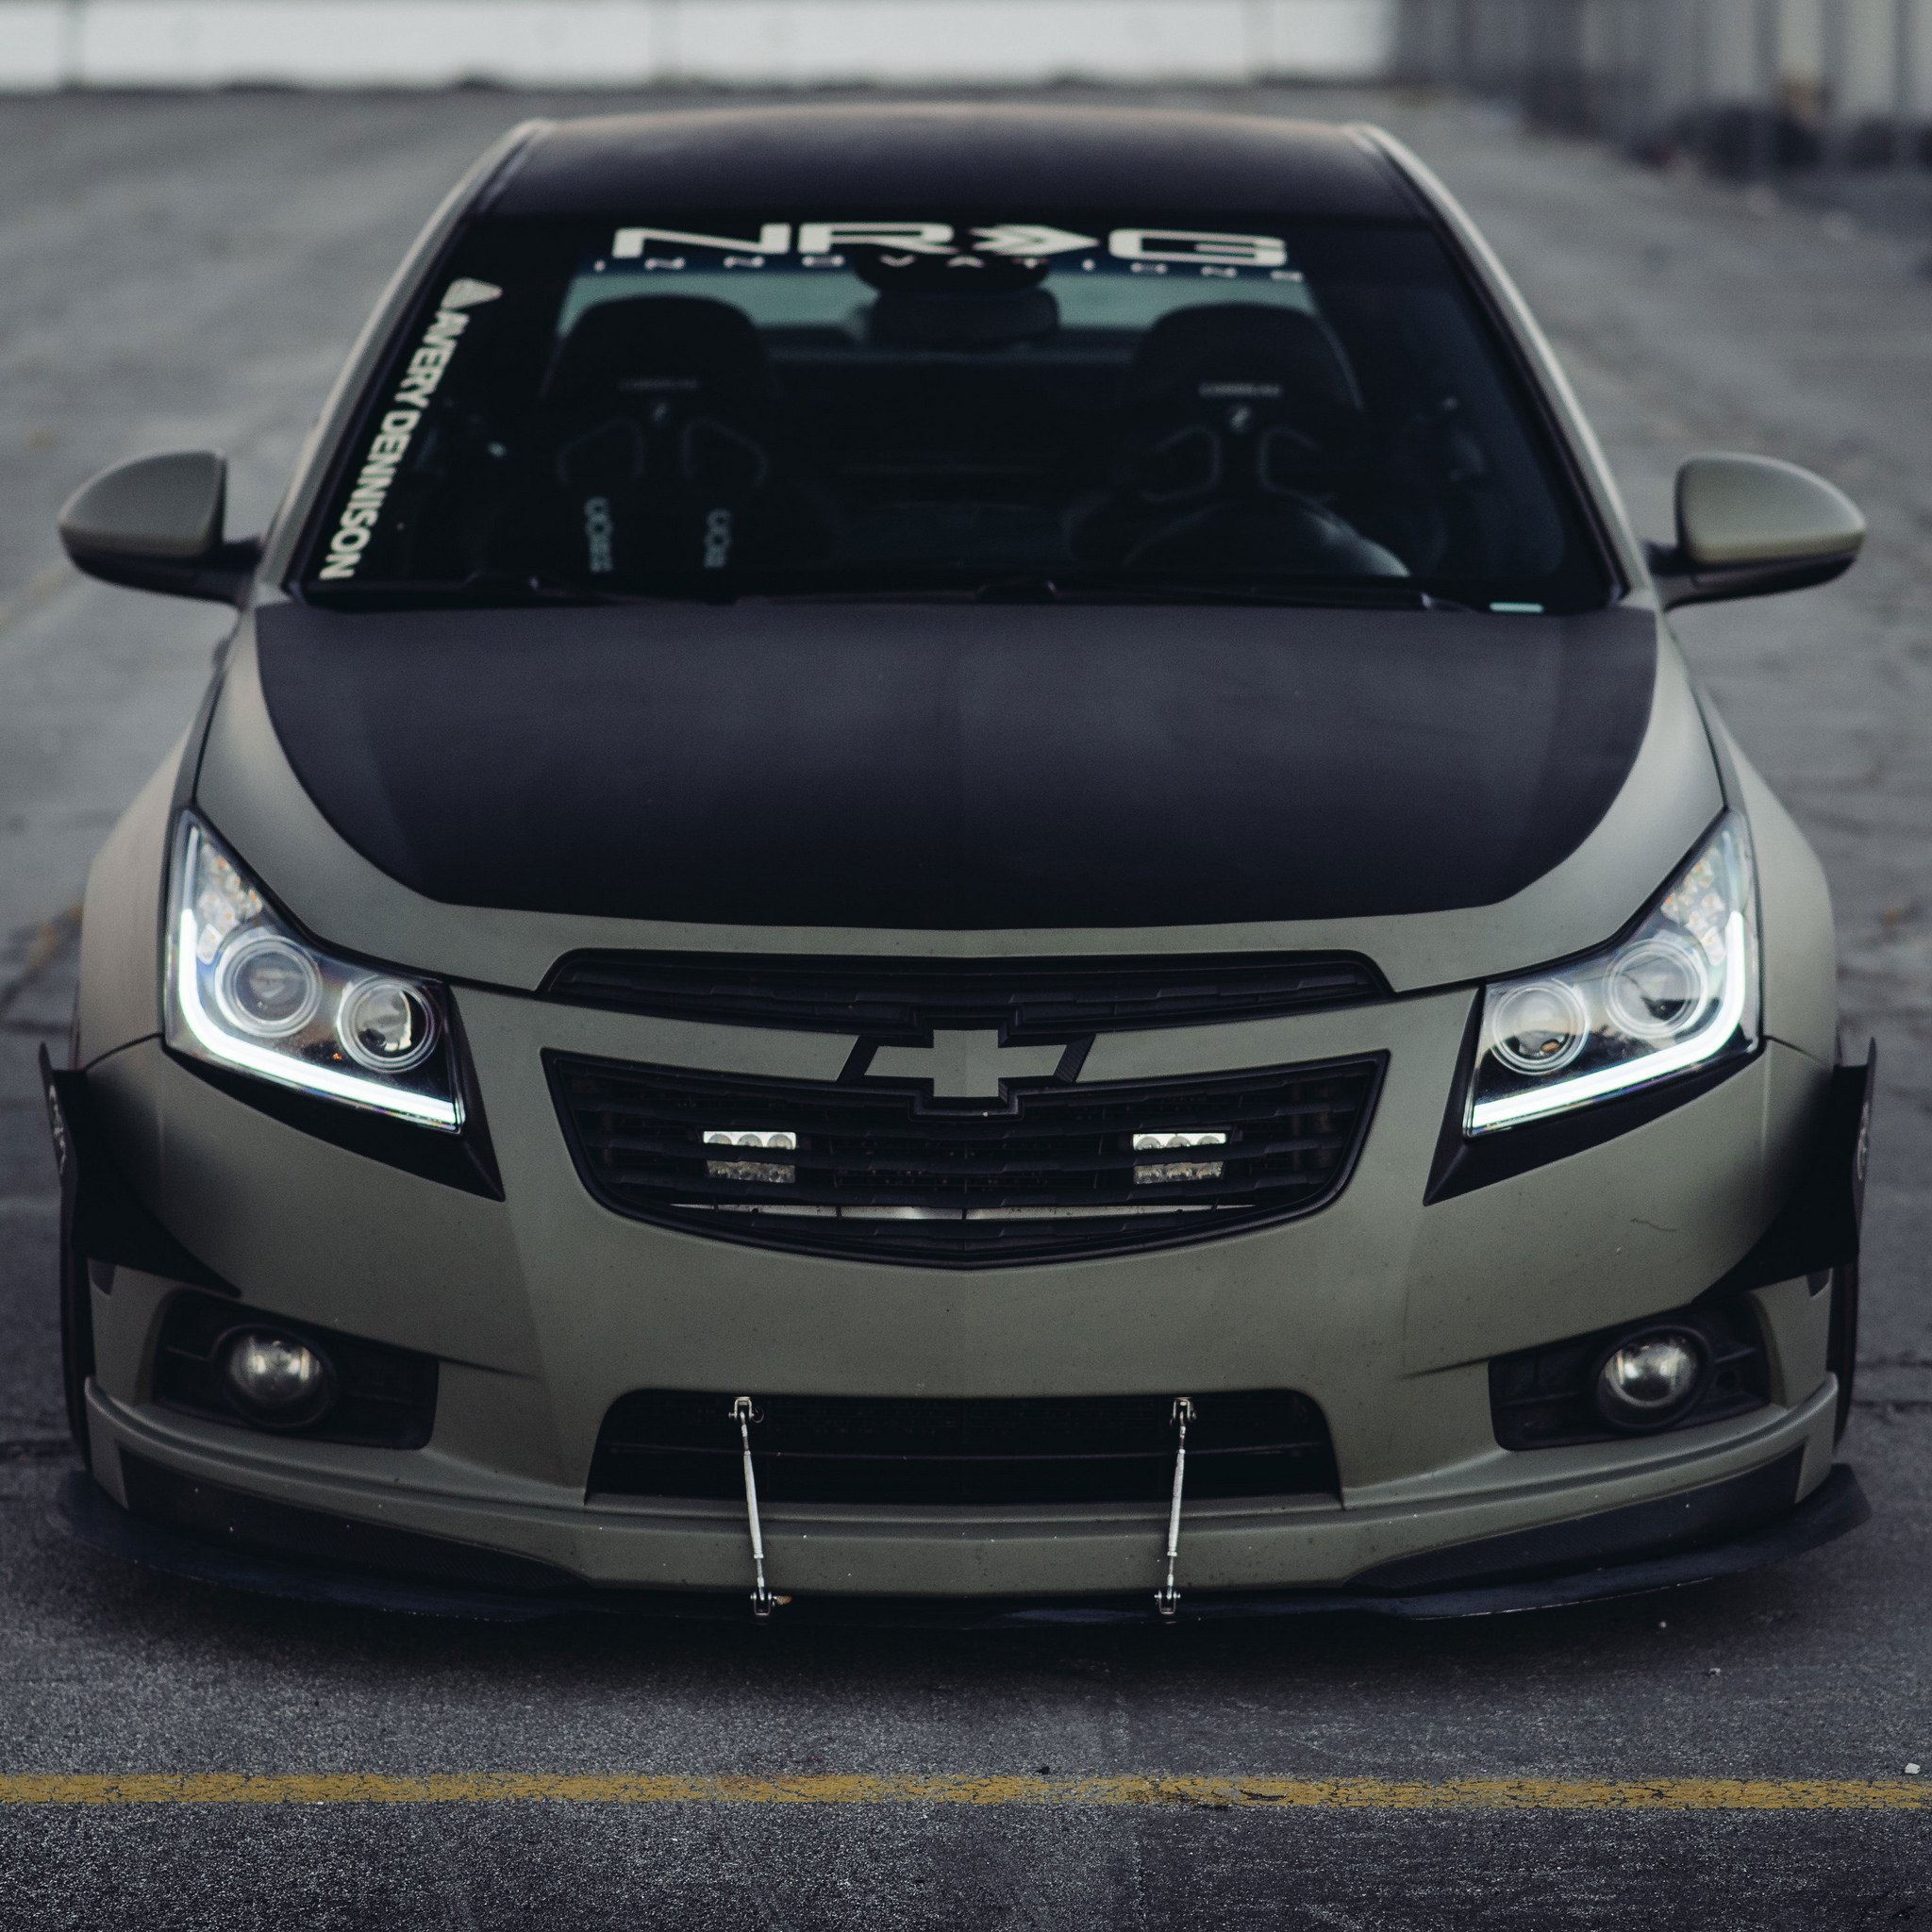 Chevy Cruze With Custom Grille and Bumper Splitter - Photo by Klutch Wheels